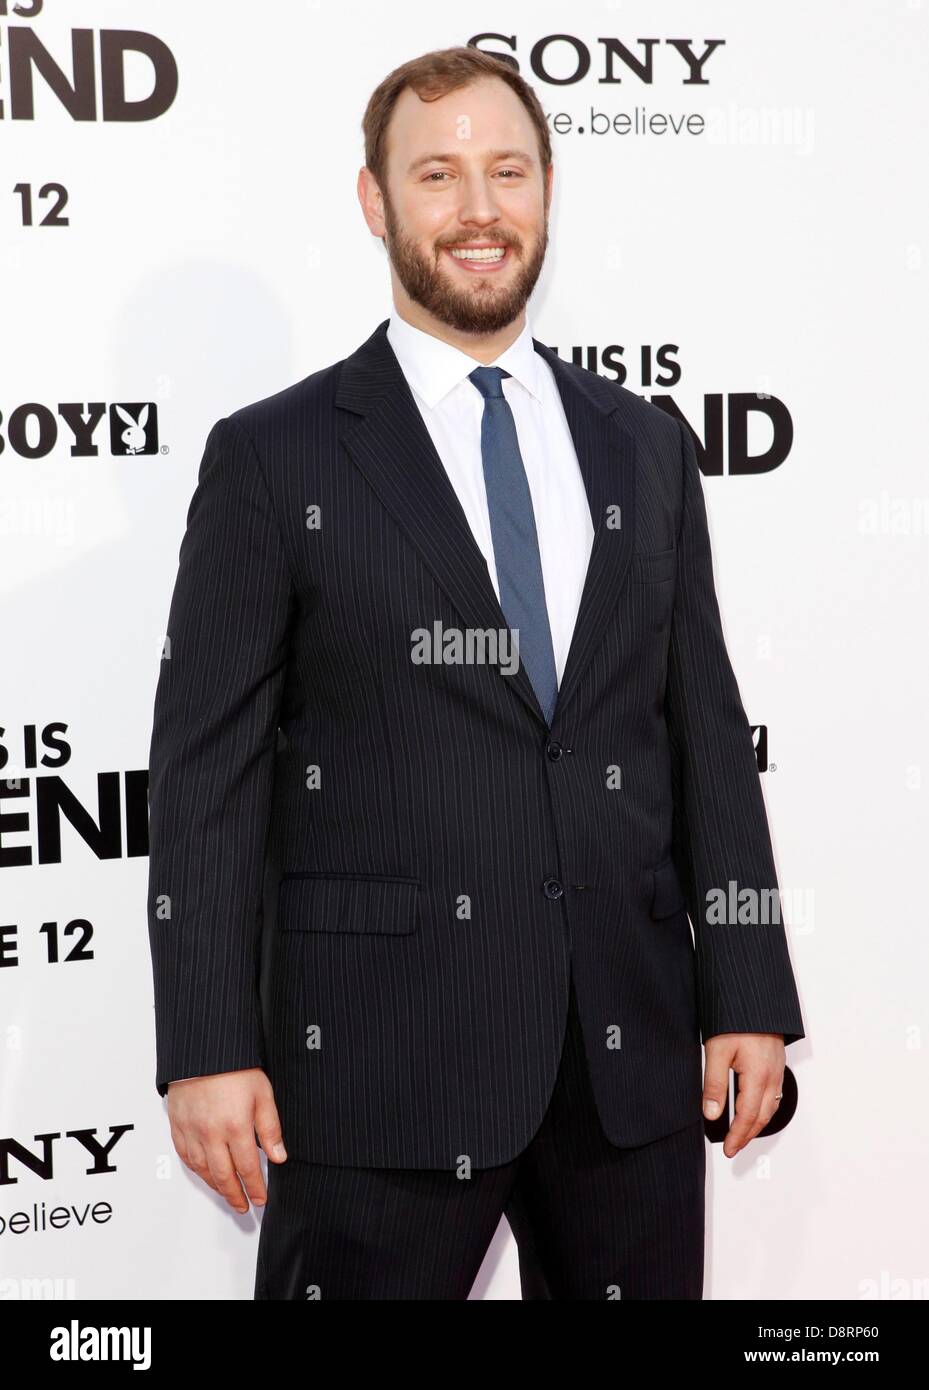 Los Angeles, California, USA. 3rd June 2013. Evan Goldberg at arrivals for THIS IS THE END Premiere, Regency Village Westwood Theatre, Los Angeles, CA June 3, 2013. Photo By: Emiley Schweich/Everett Collection/Alamy Live News Stock Photo